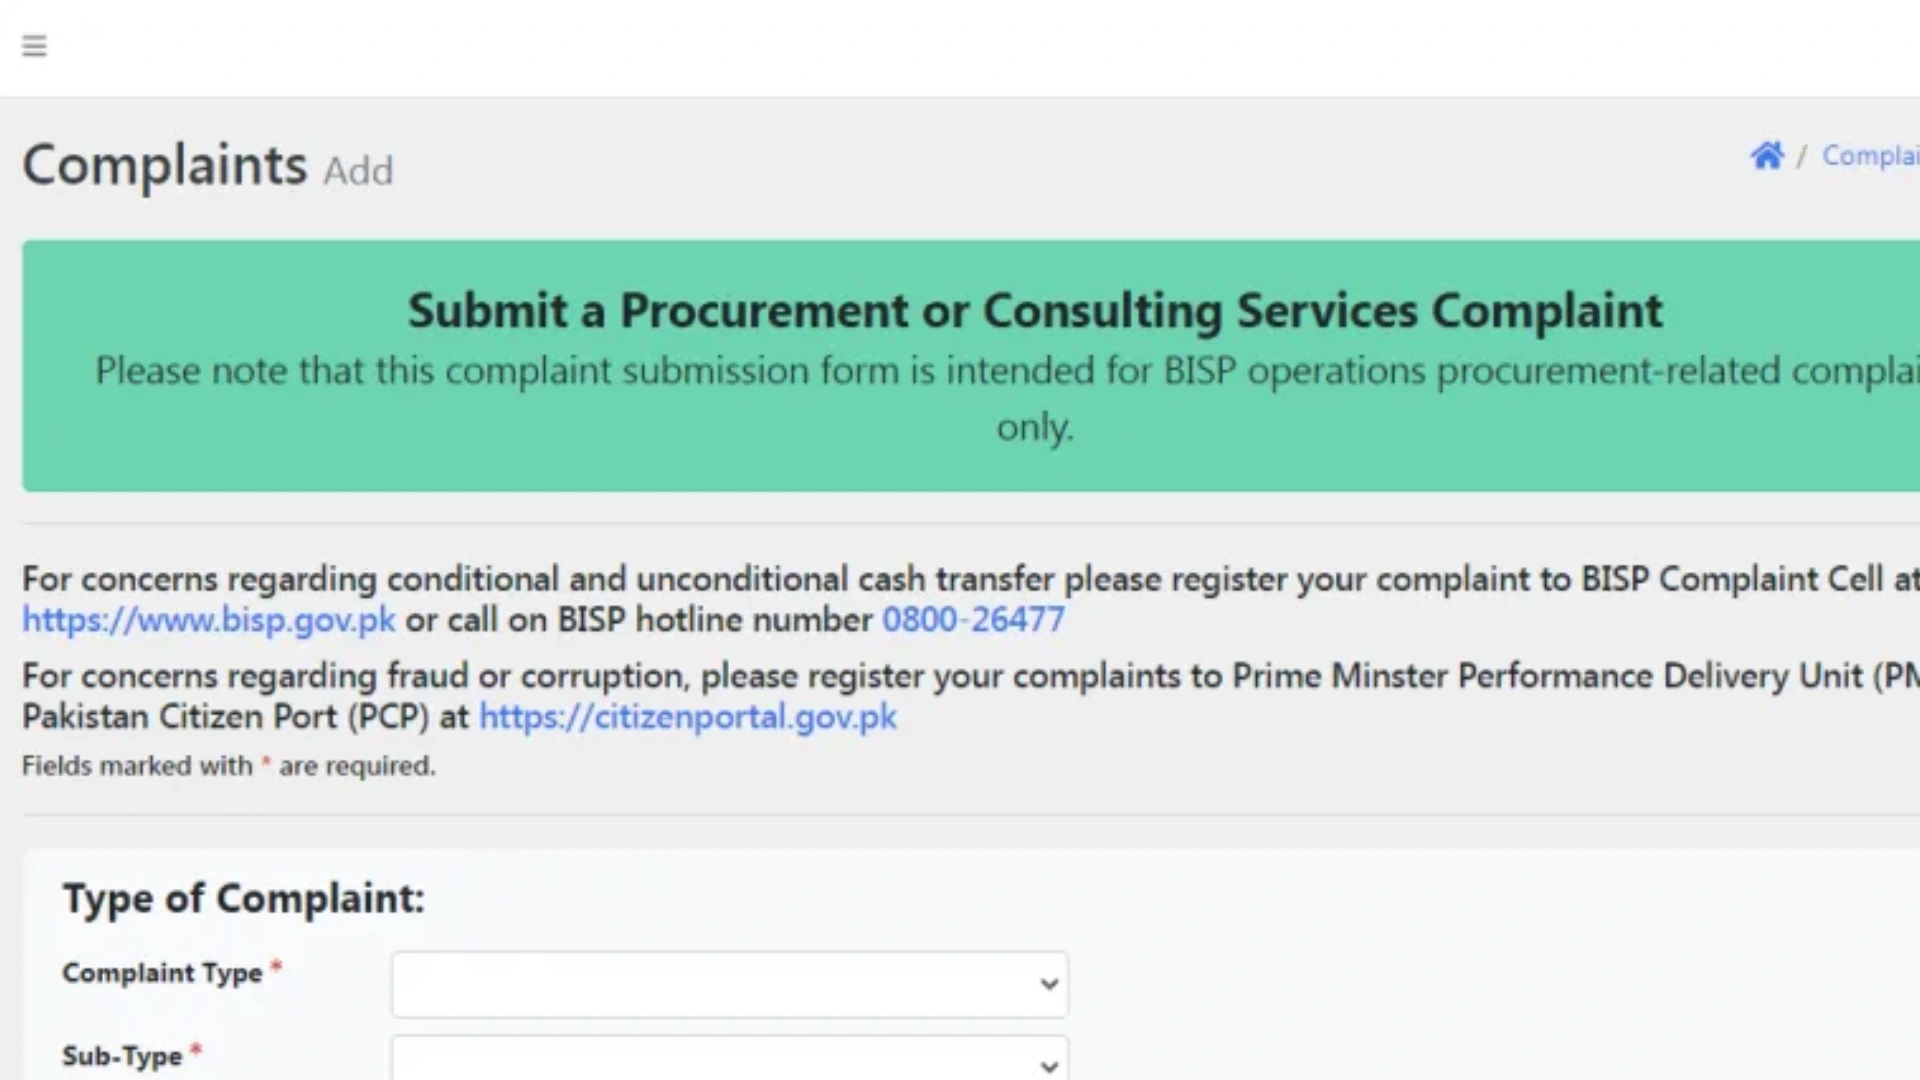 Guidance About Registering a Complaint in BISP